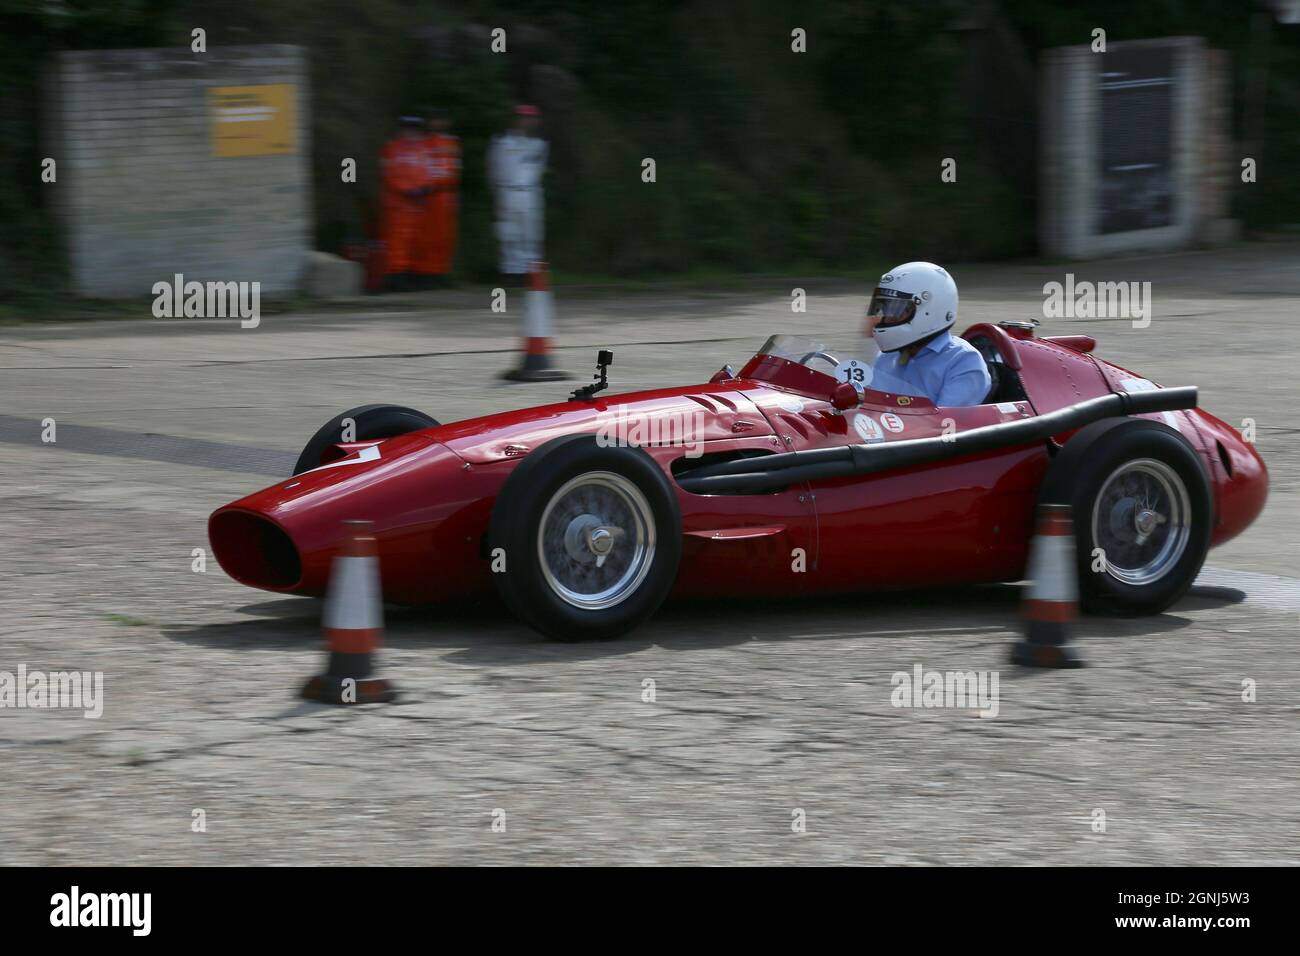 Maserati 250F (1954), Stirling Moss Tribute, 12 septembre 2021, Brooklands Museum, Weybridge,Surrey, Angleterre, Royaume-Uni, Europe Banque D'Images